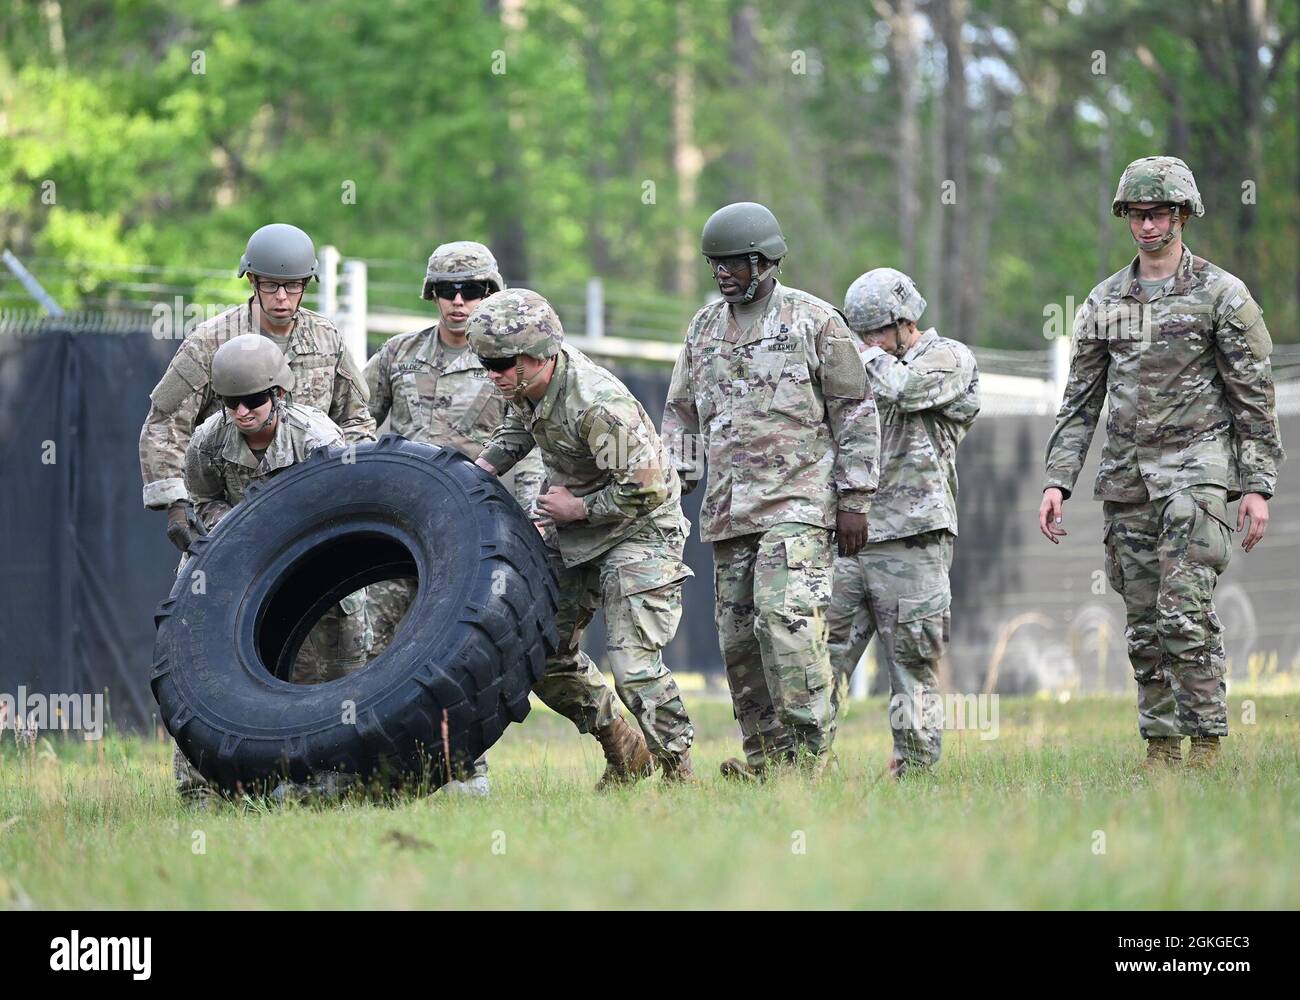 Soldiers from Support Battalion, 1st Special Warfare Training Group (Airborne) flip a truck tire as part of a stress-shoot during the battalion's Commander's Cup competition at Fort Bragg, North Carolina April 15, 2021. The Soldiers from each company competed in a ruck march, obstacle course, land navigation, Jeopardy-themed trivia contest and stress shoot with pistols and rifles. Stock Photo